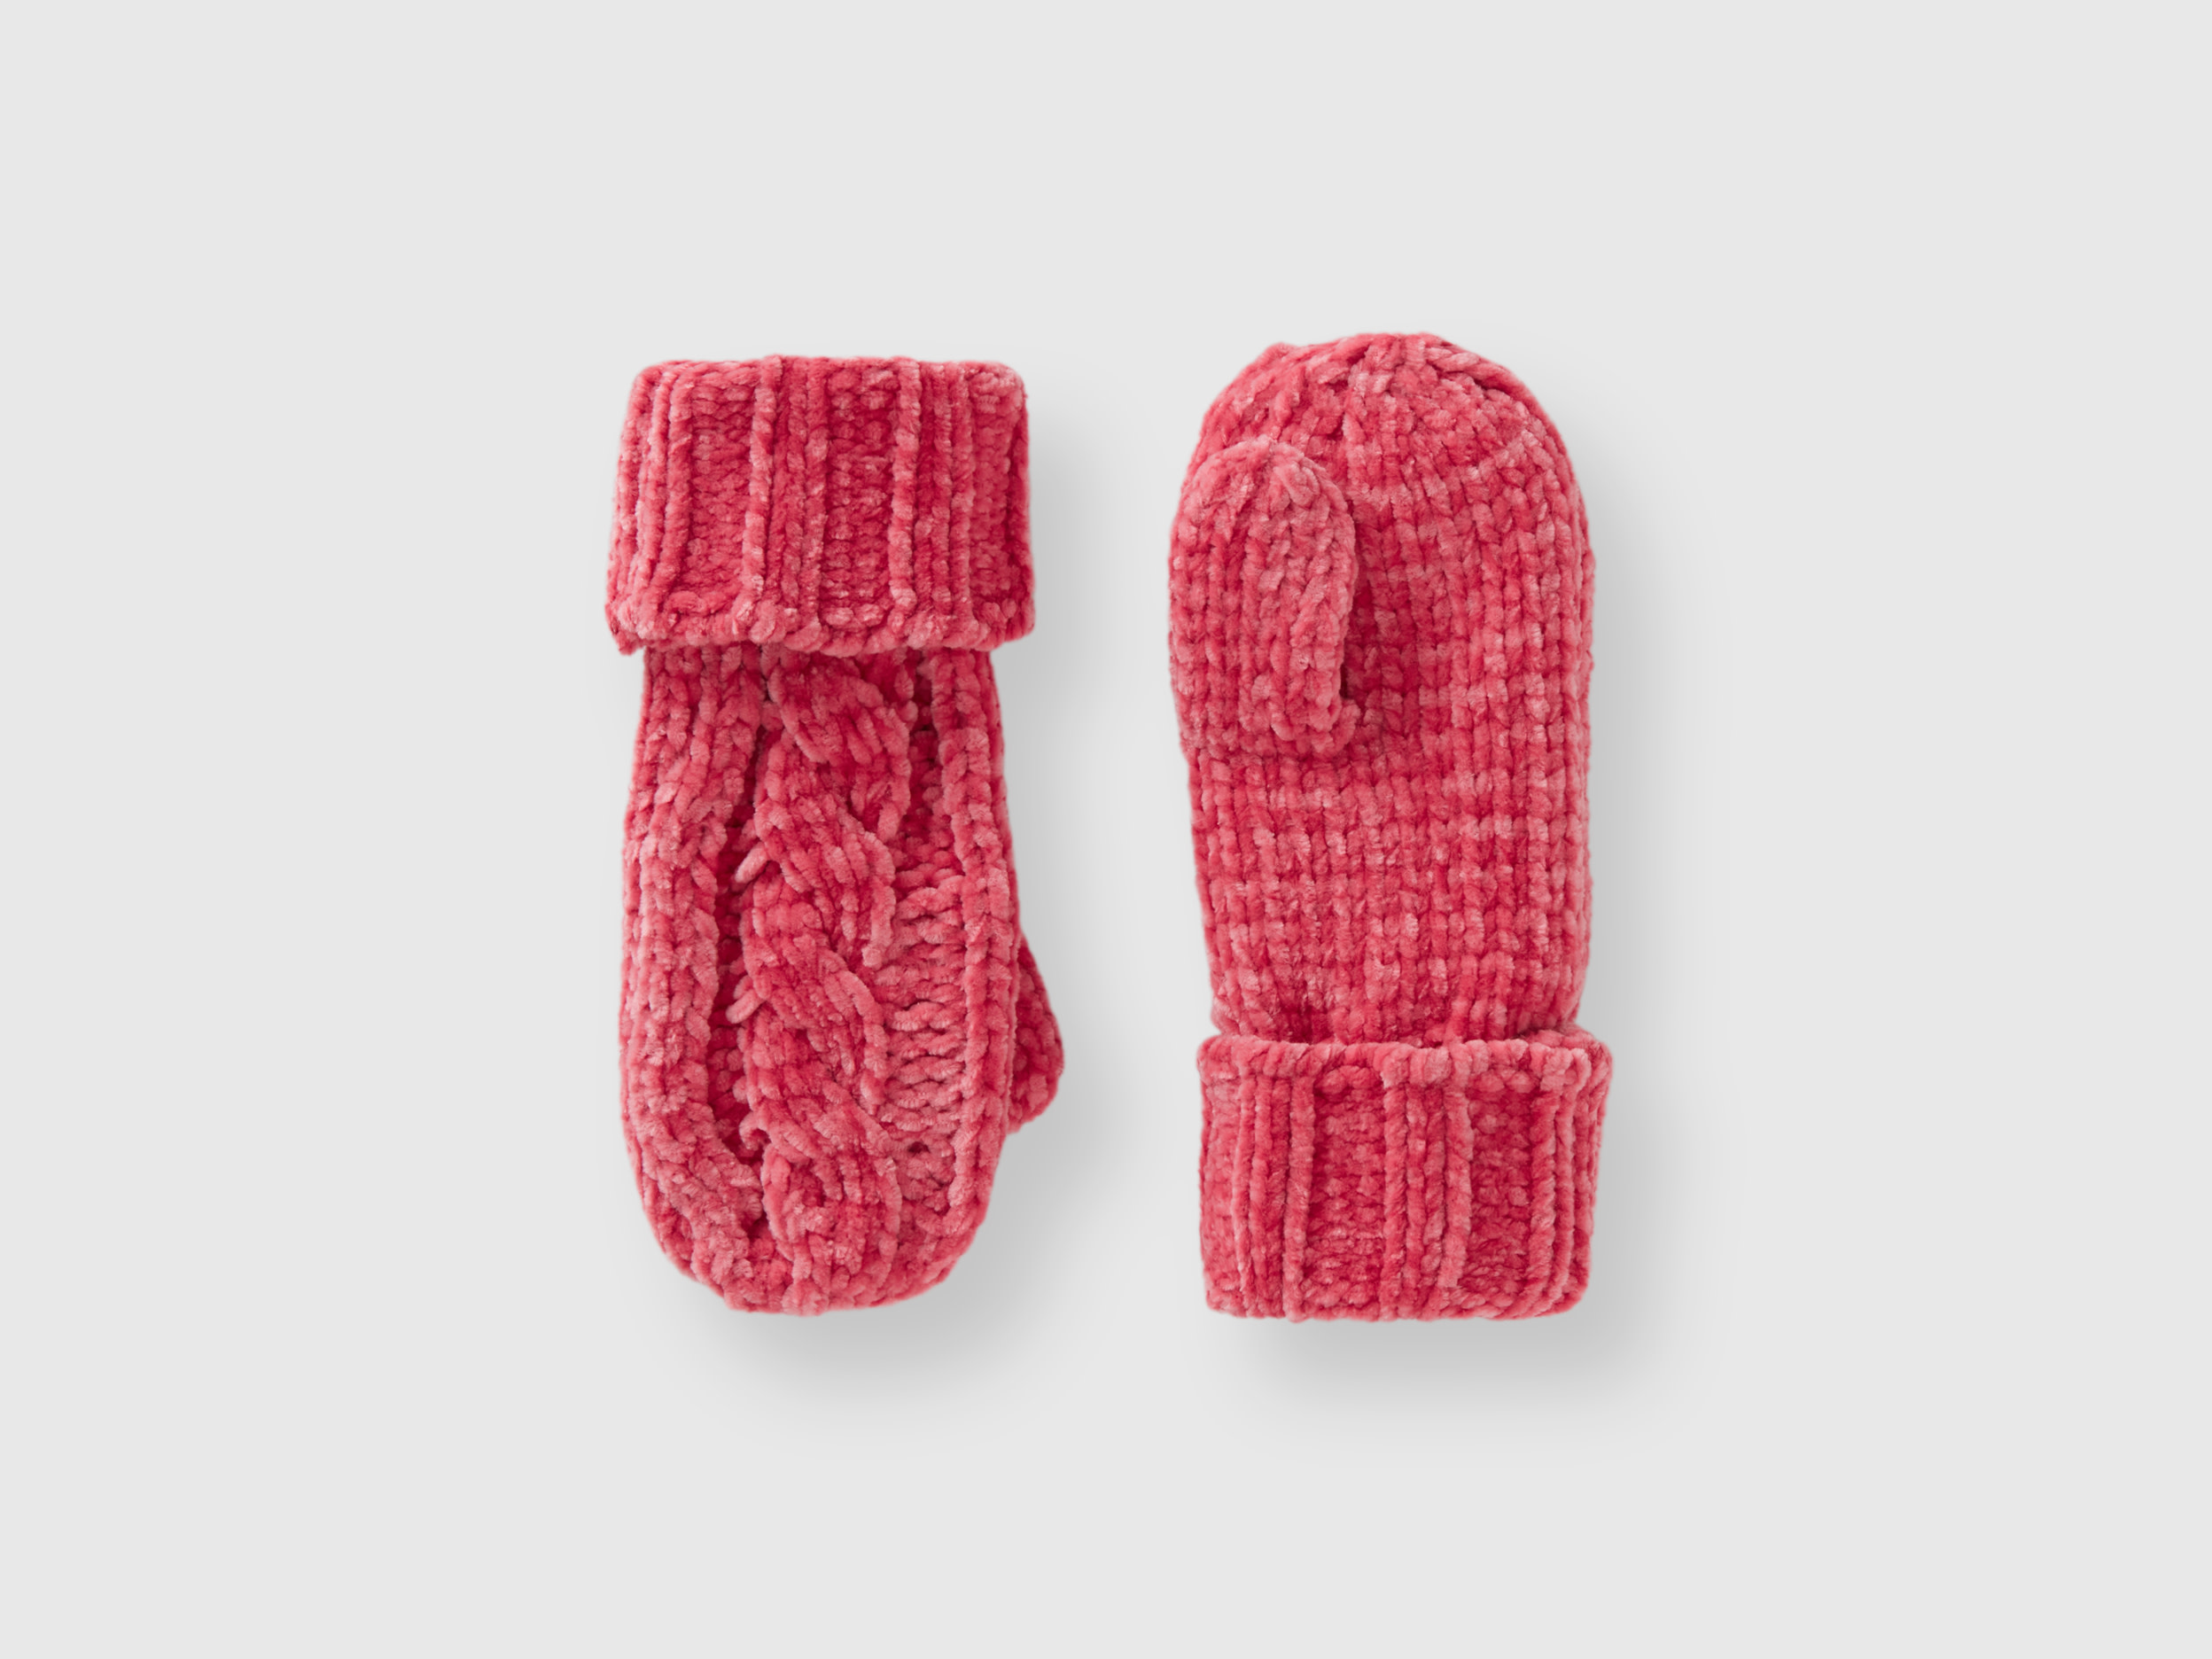 Benetton, Chenille Gloves With Cable Knit, size 4-6, Pink, Kids